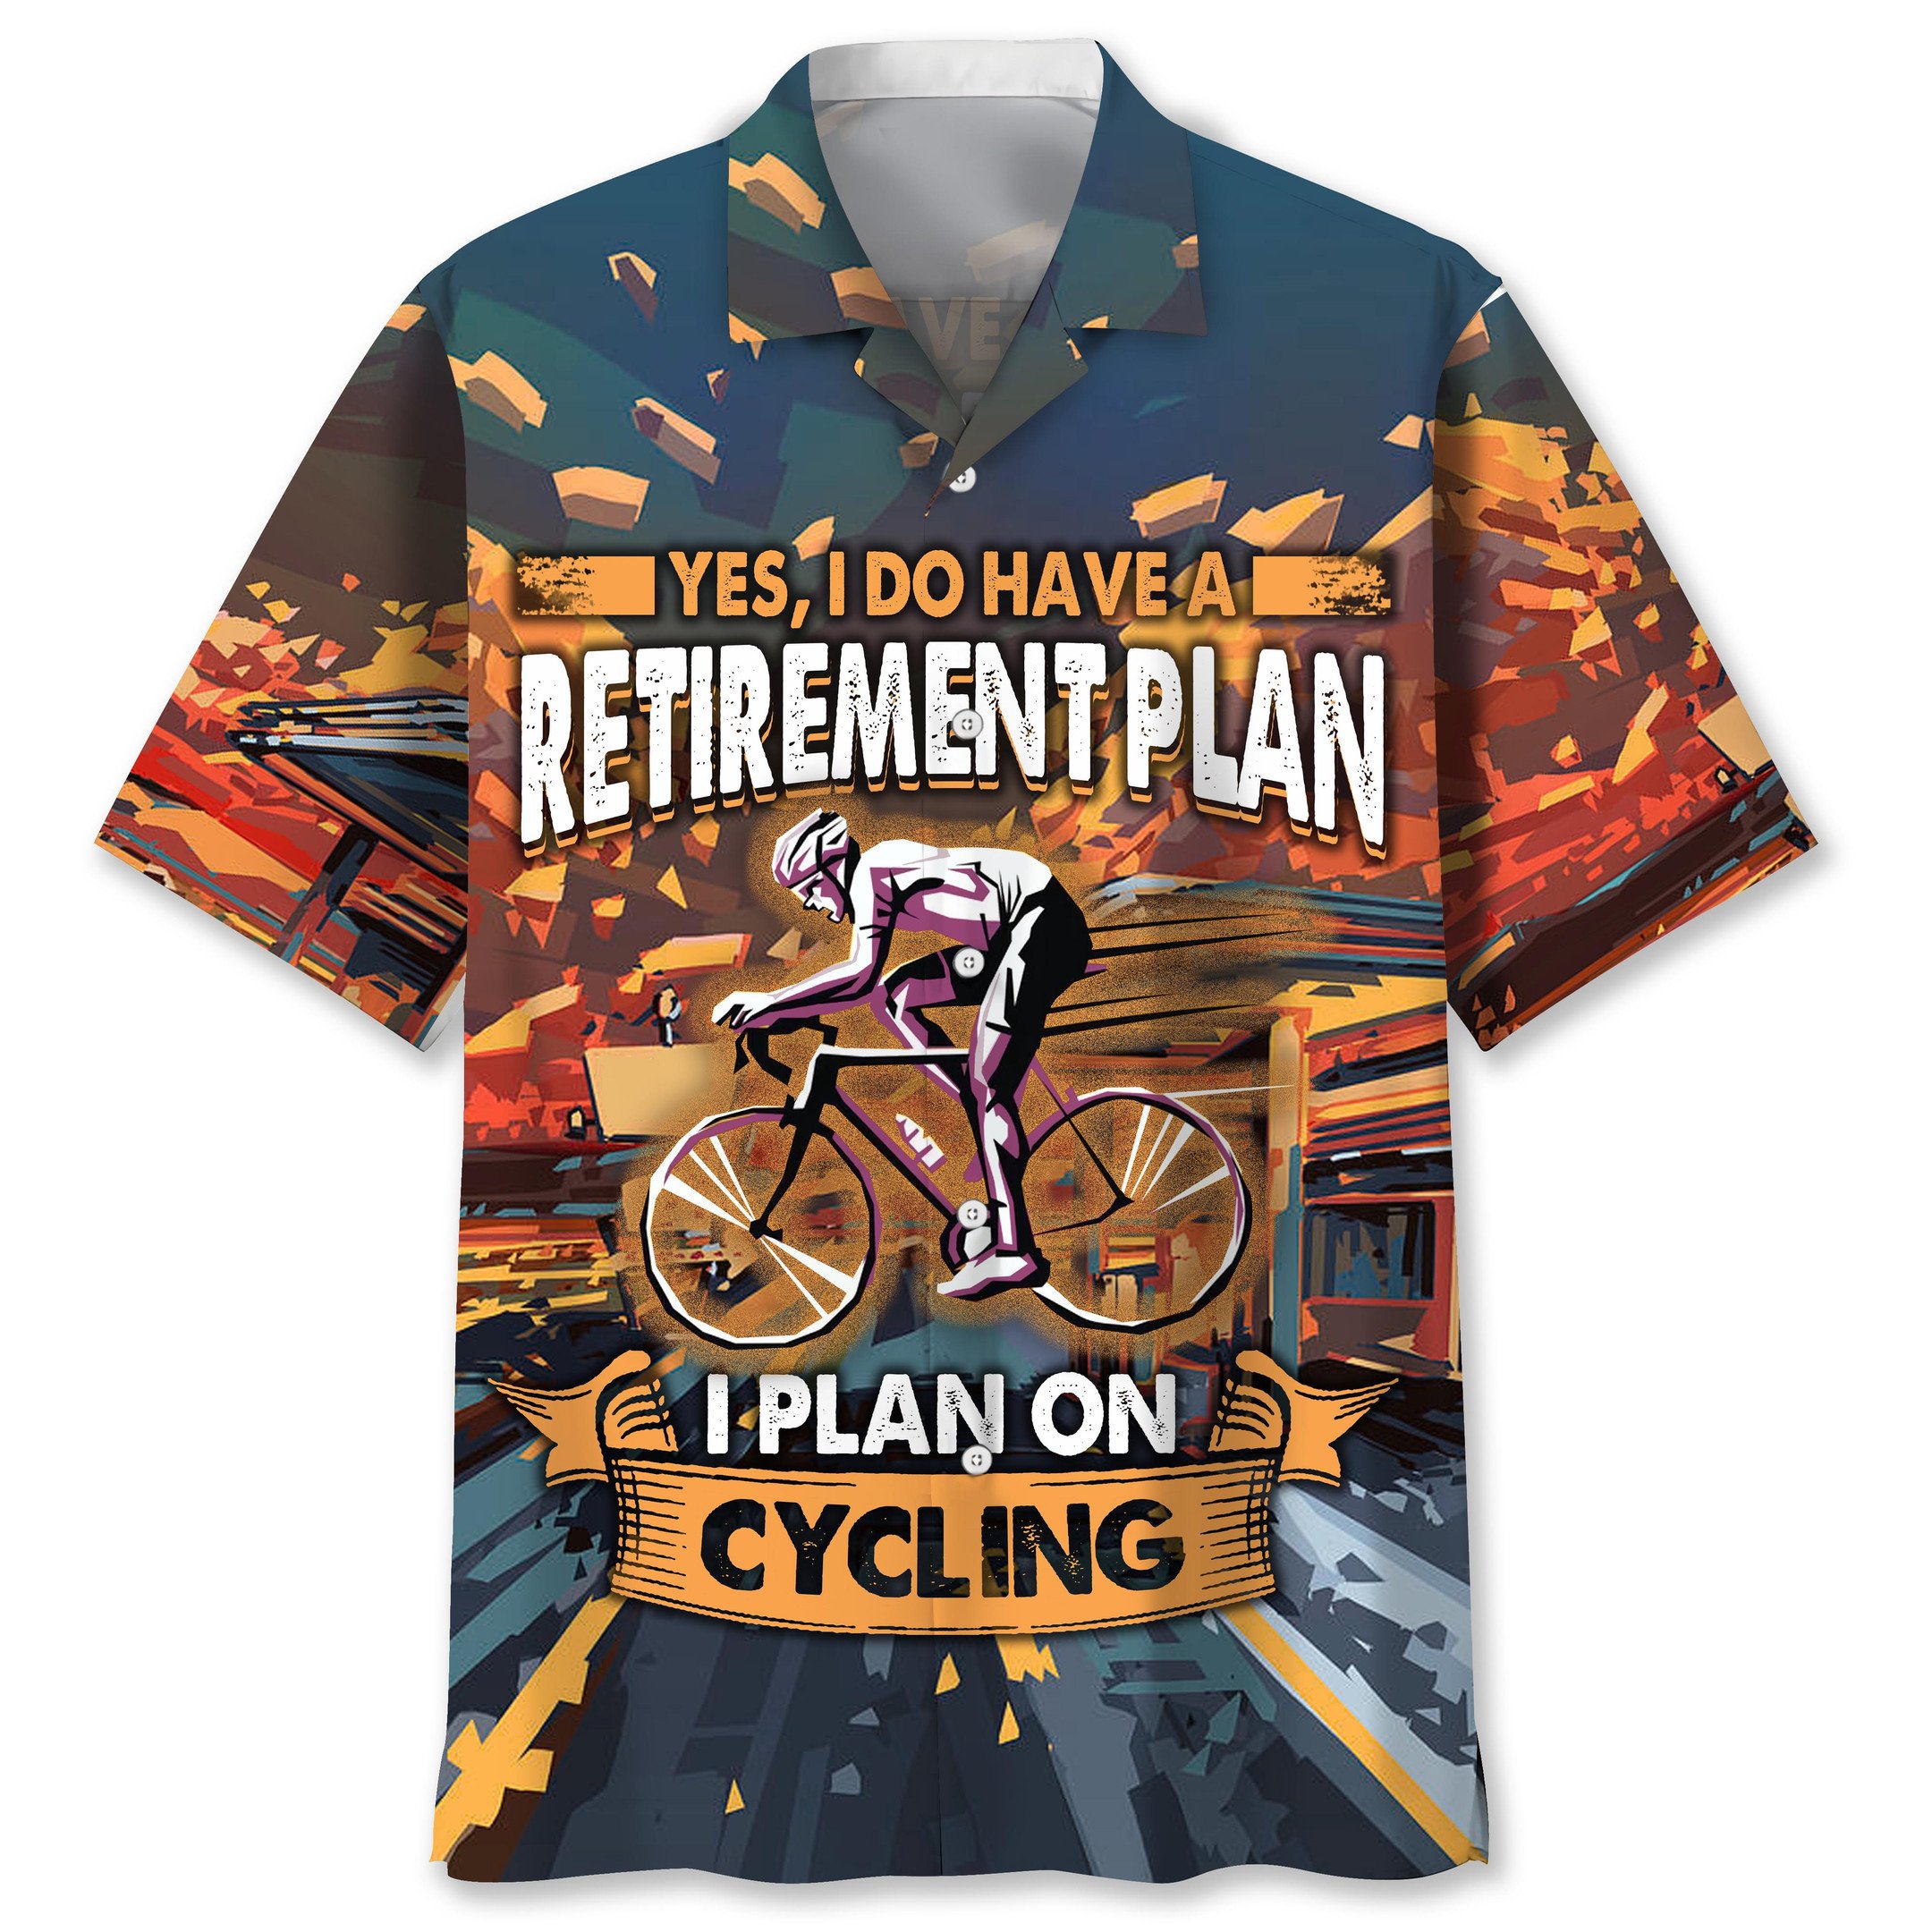 NEW Cycling Yes I do have a Retirement Plan Hawaiian Shirt